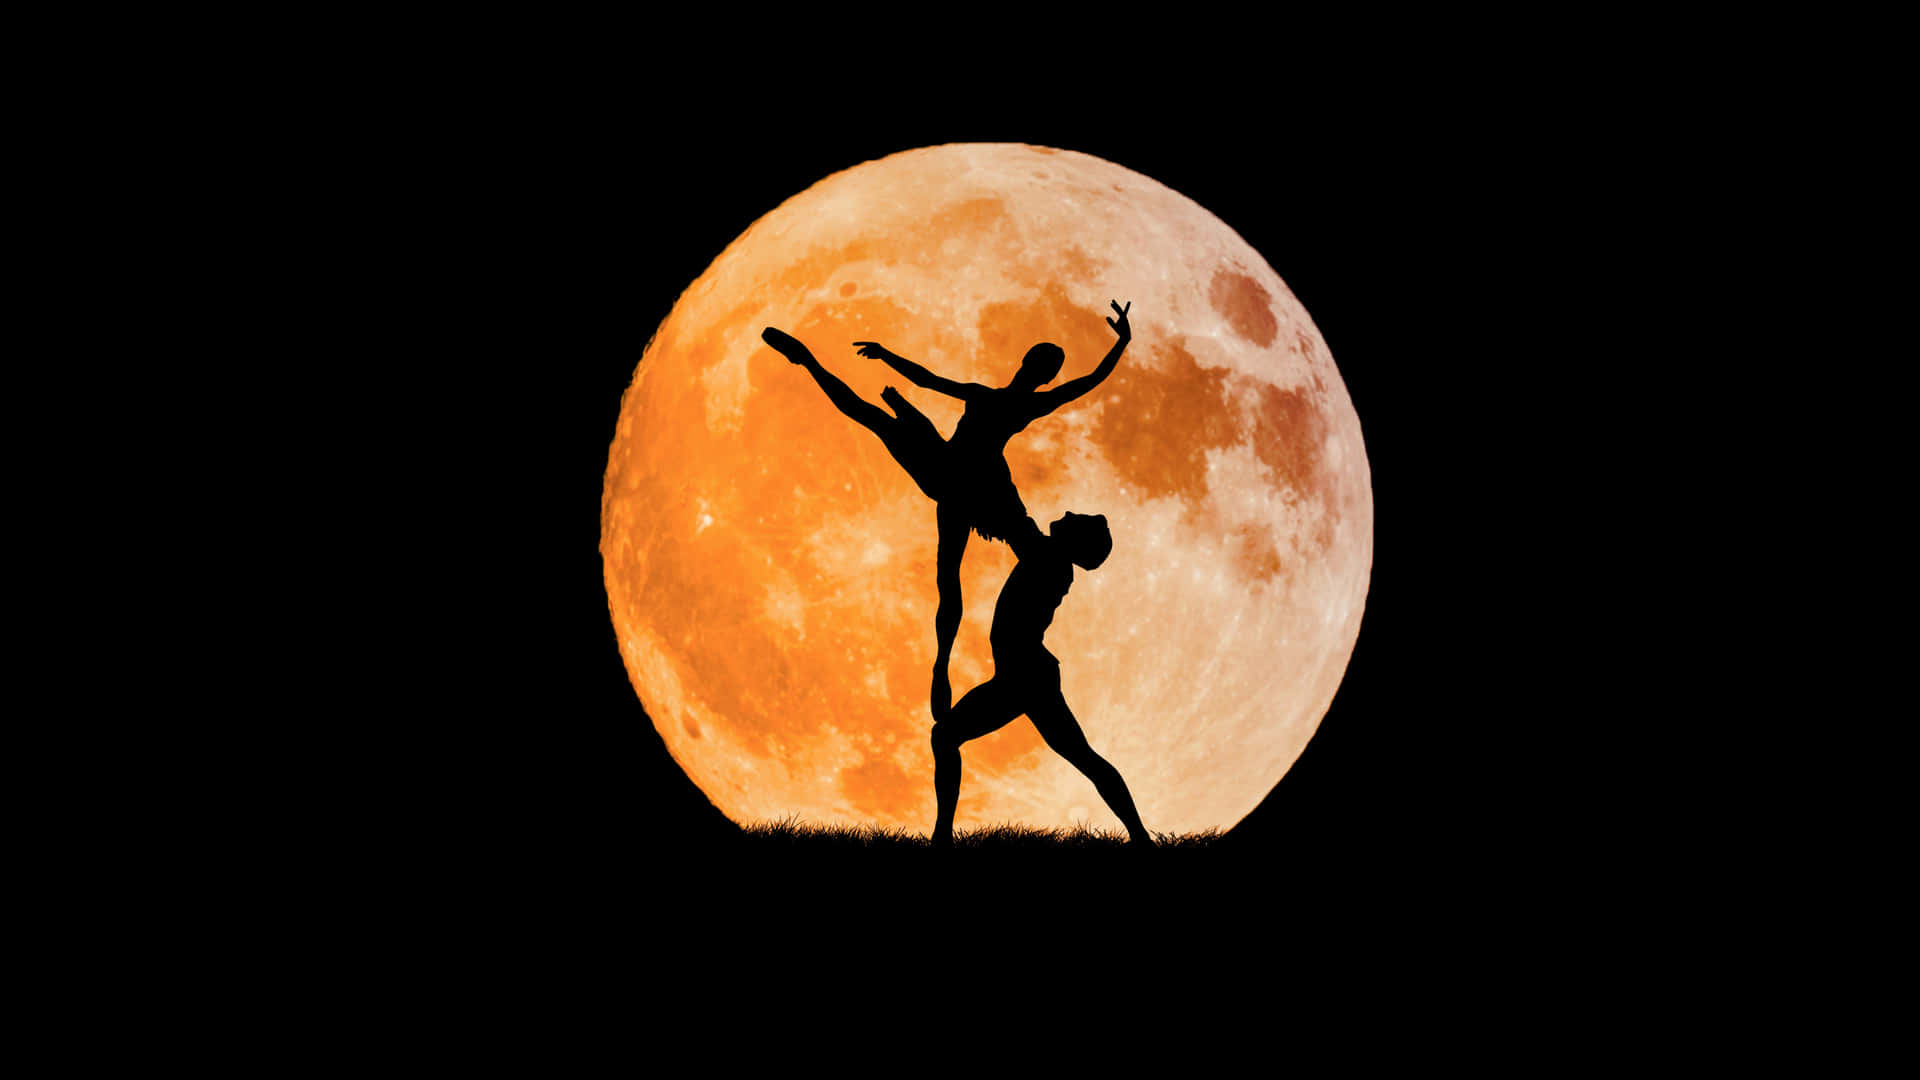 A Couple Of Dancers In Silhouette Against The Moon